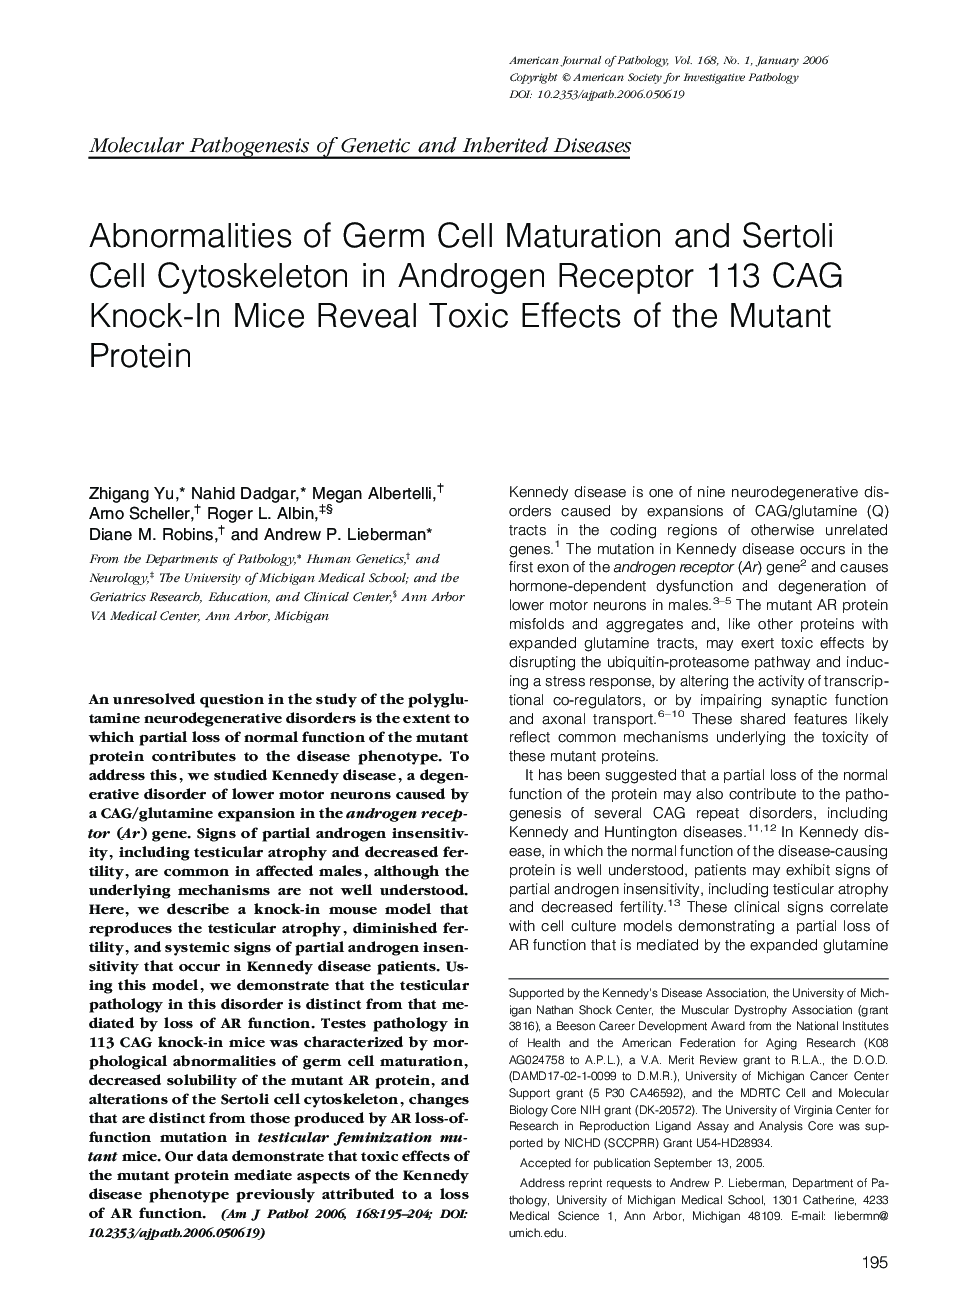 Regular ArticlesAbnormalities of Germ Cell Maturation and Sertoli Cell Cytoskeleton in Androgen Receptor 113 CAG Knock-In Mice Reveal Toxic Effects of the Mutant Protein